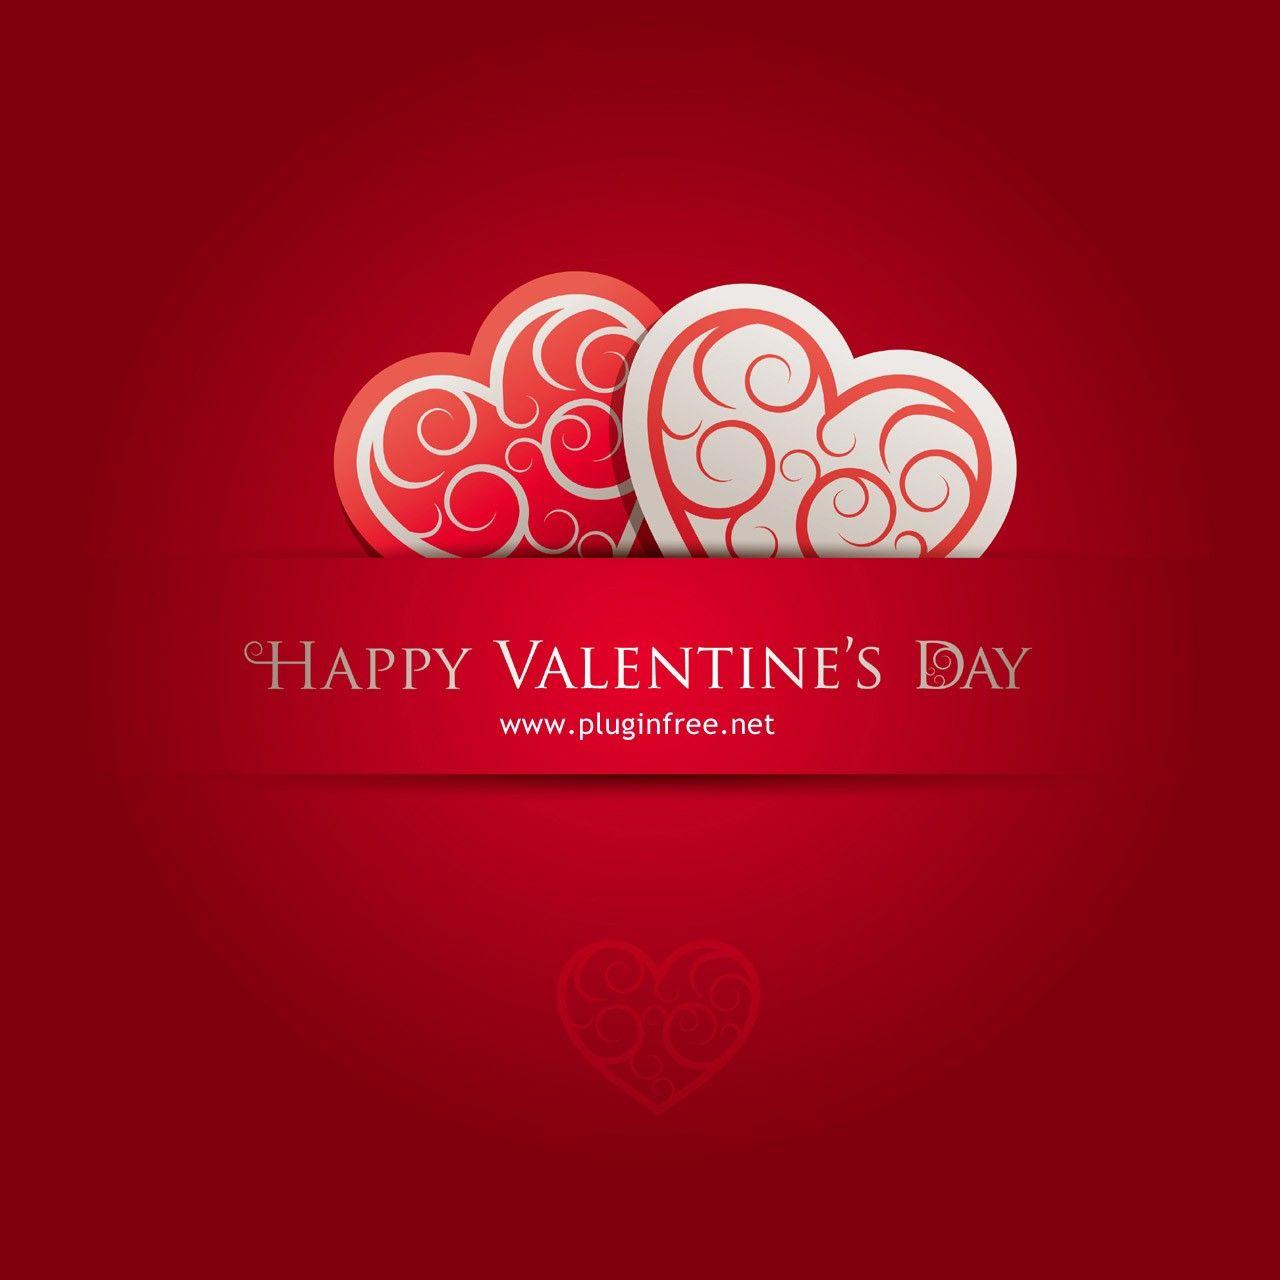 valentines day background clipart - photo #45